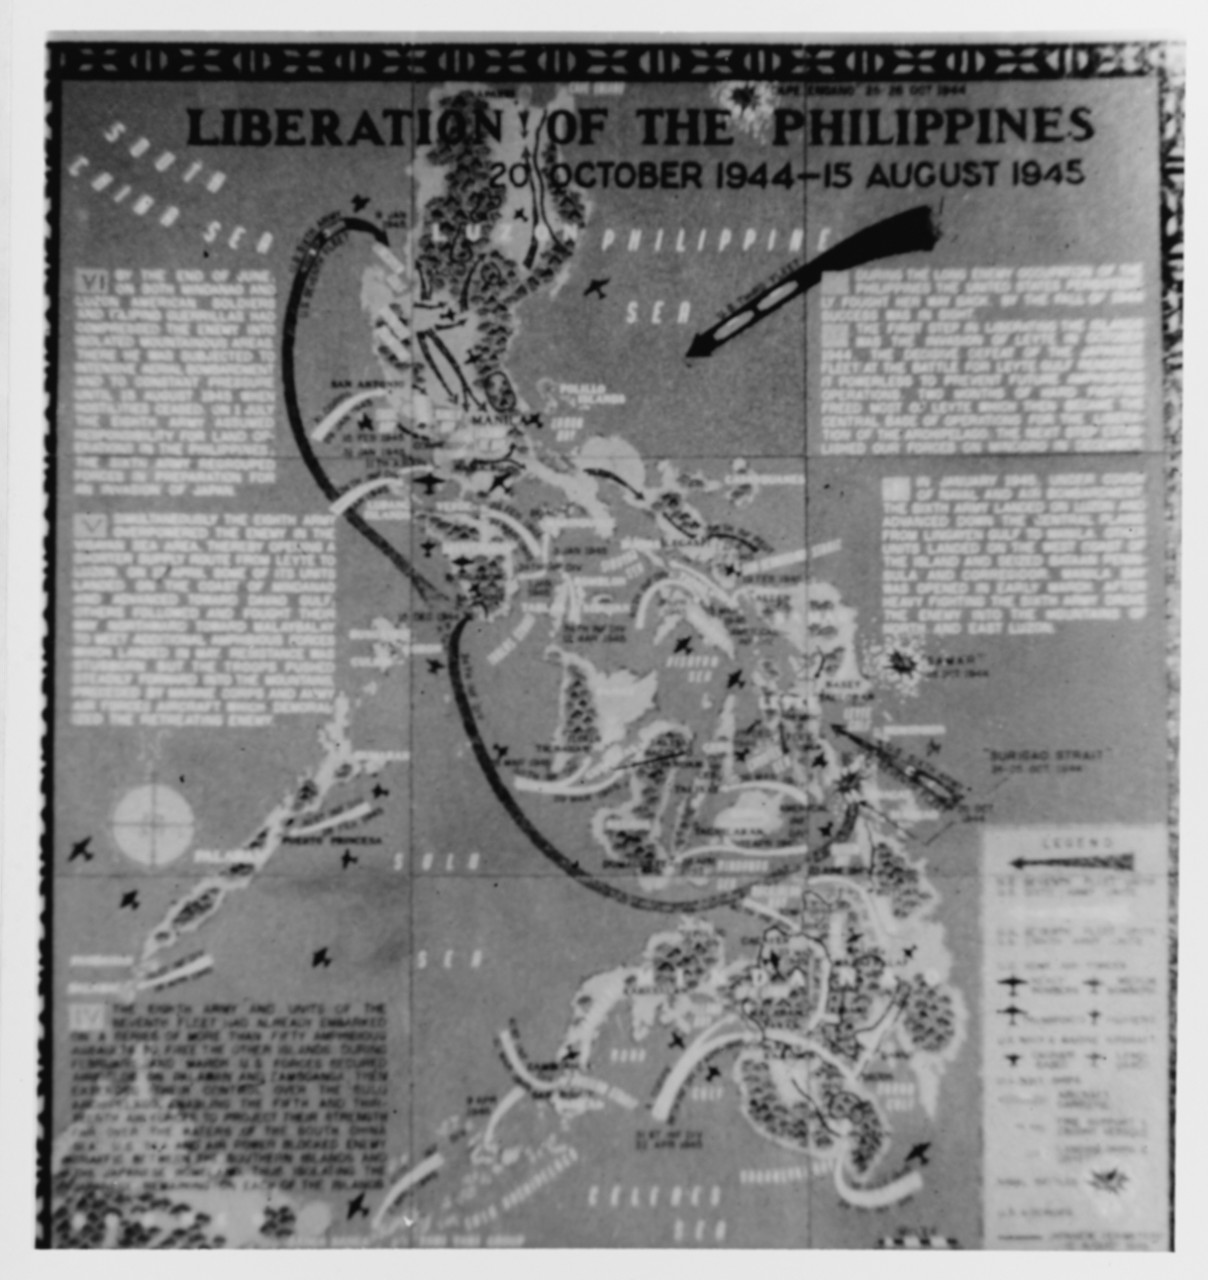 Philippines -- World War II Battle Chart, Liberation of the Philippines 20 October 1944 - 15 August 1945